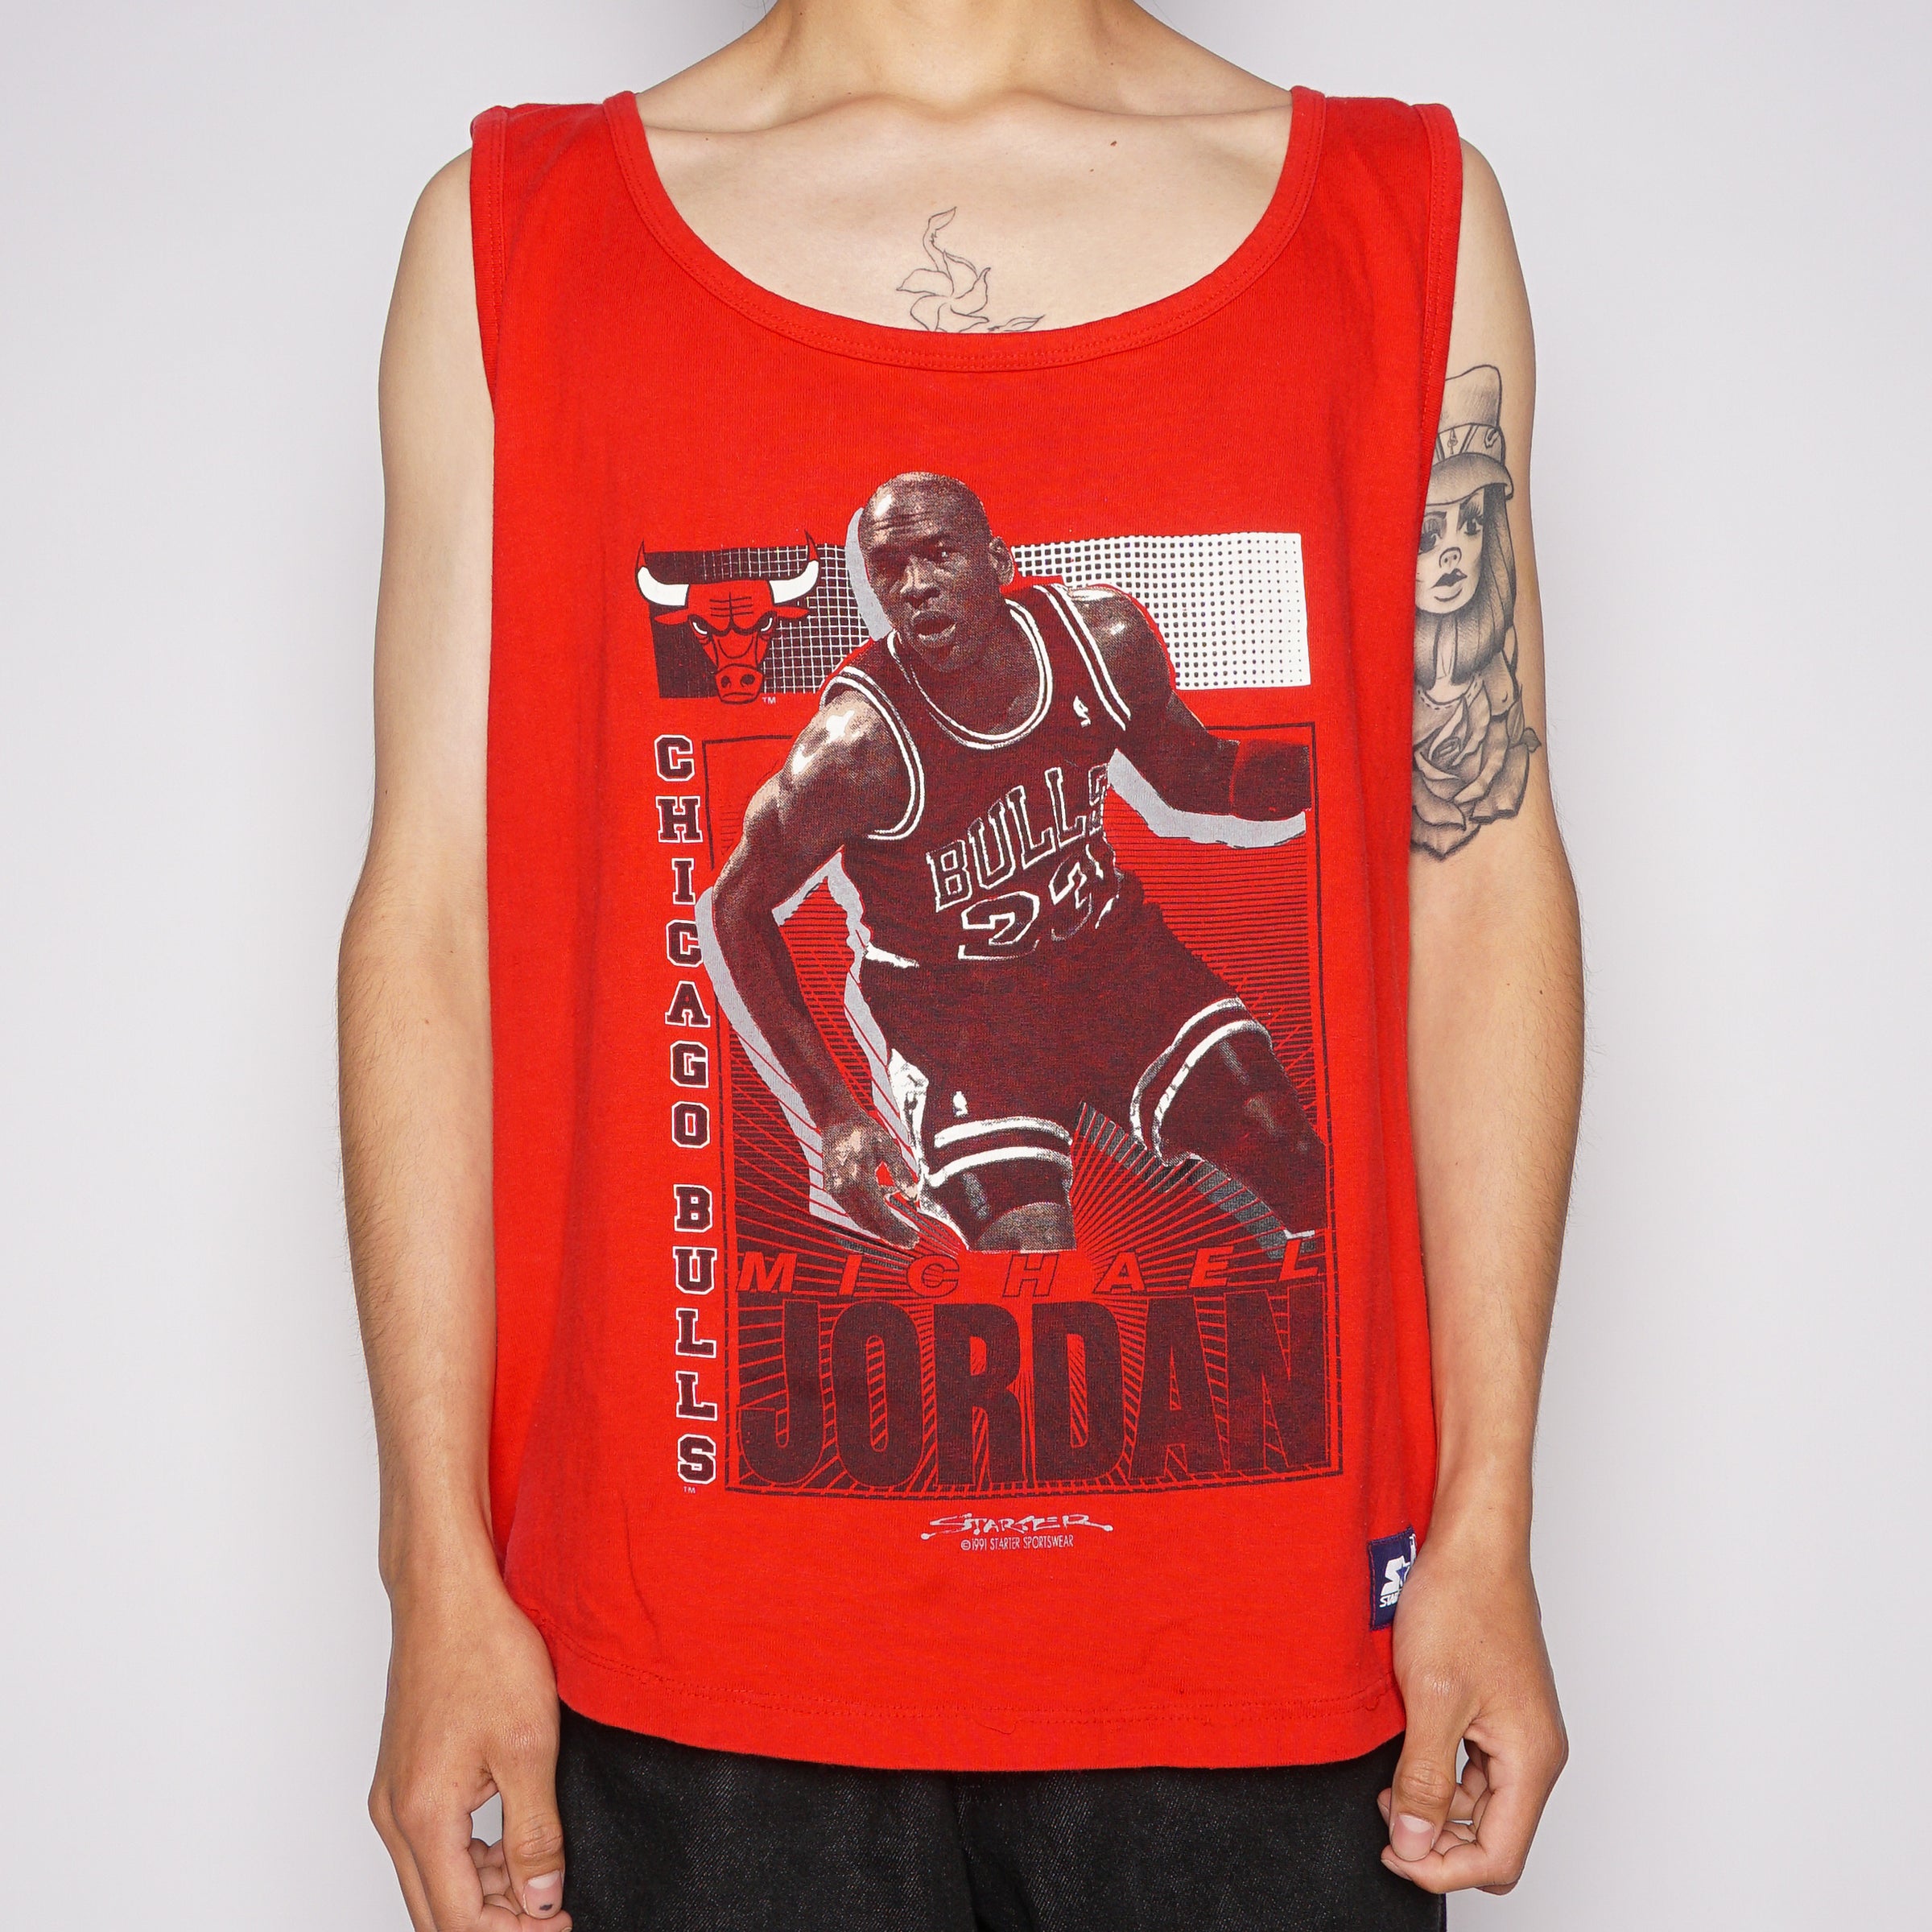 Chicago Bulls Tank Top Shirt Red From The 90's Size XL